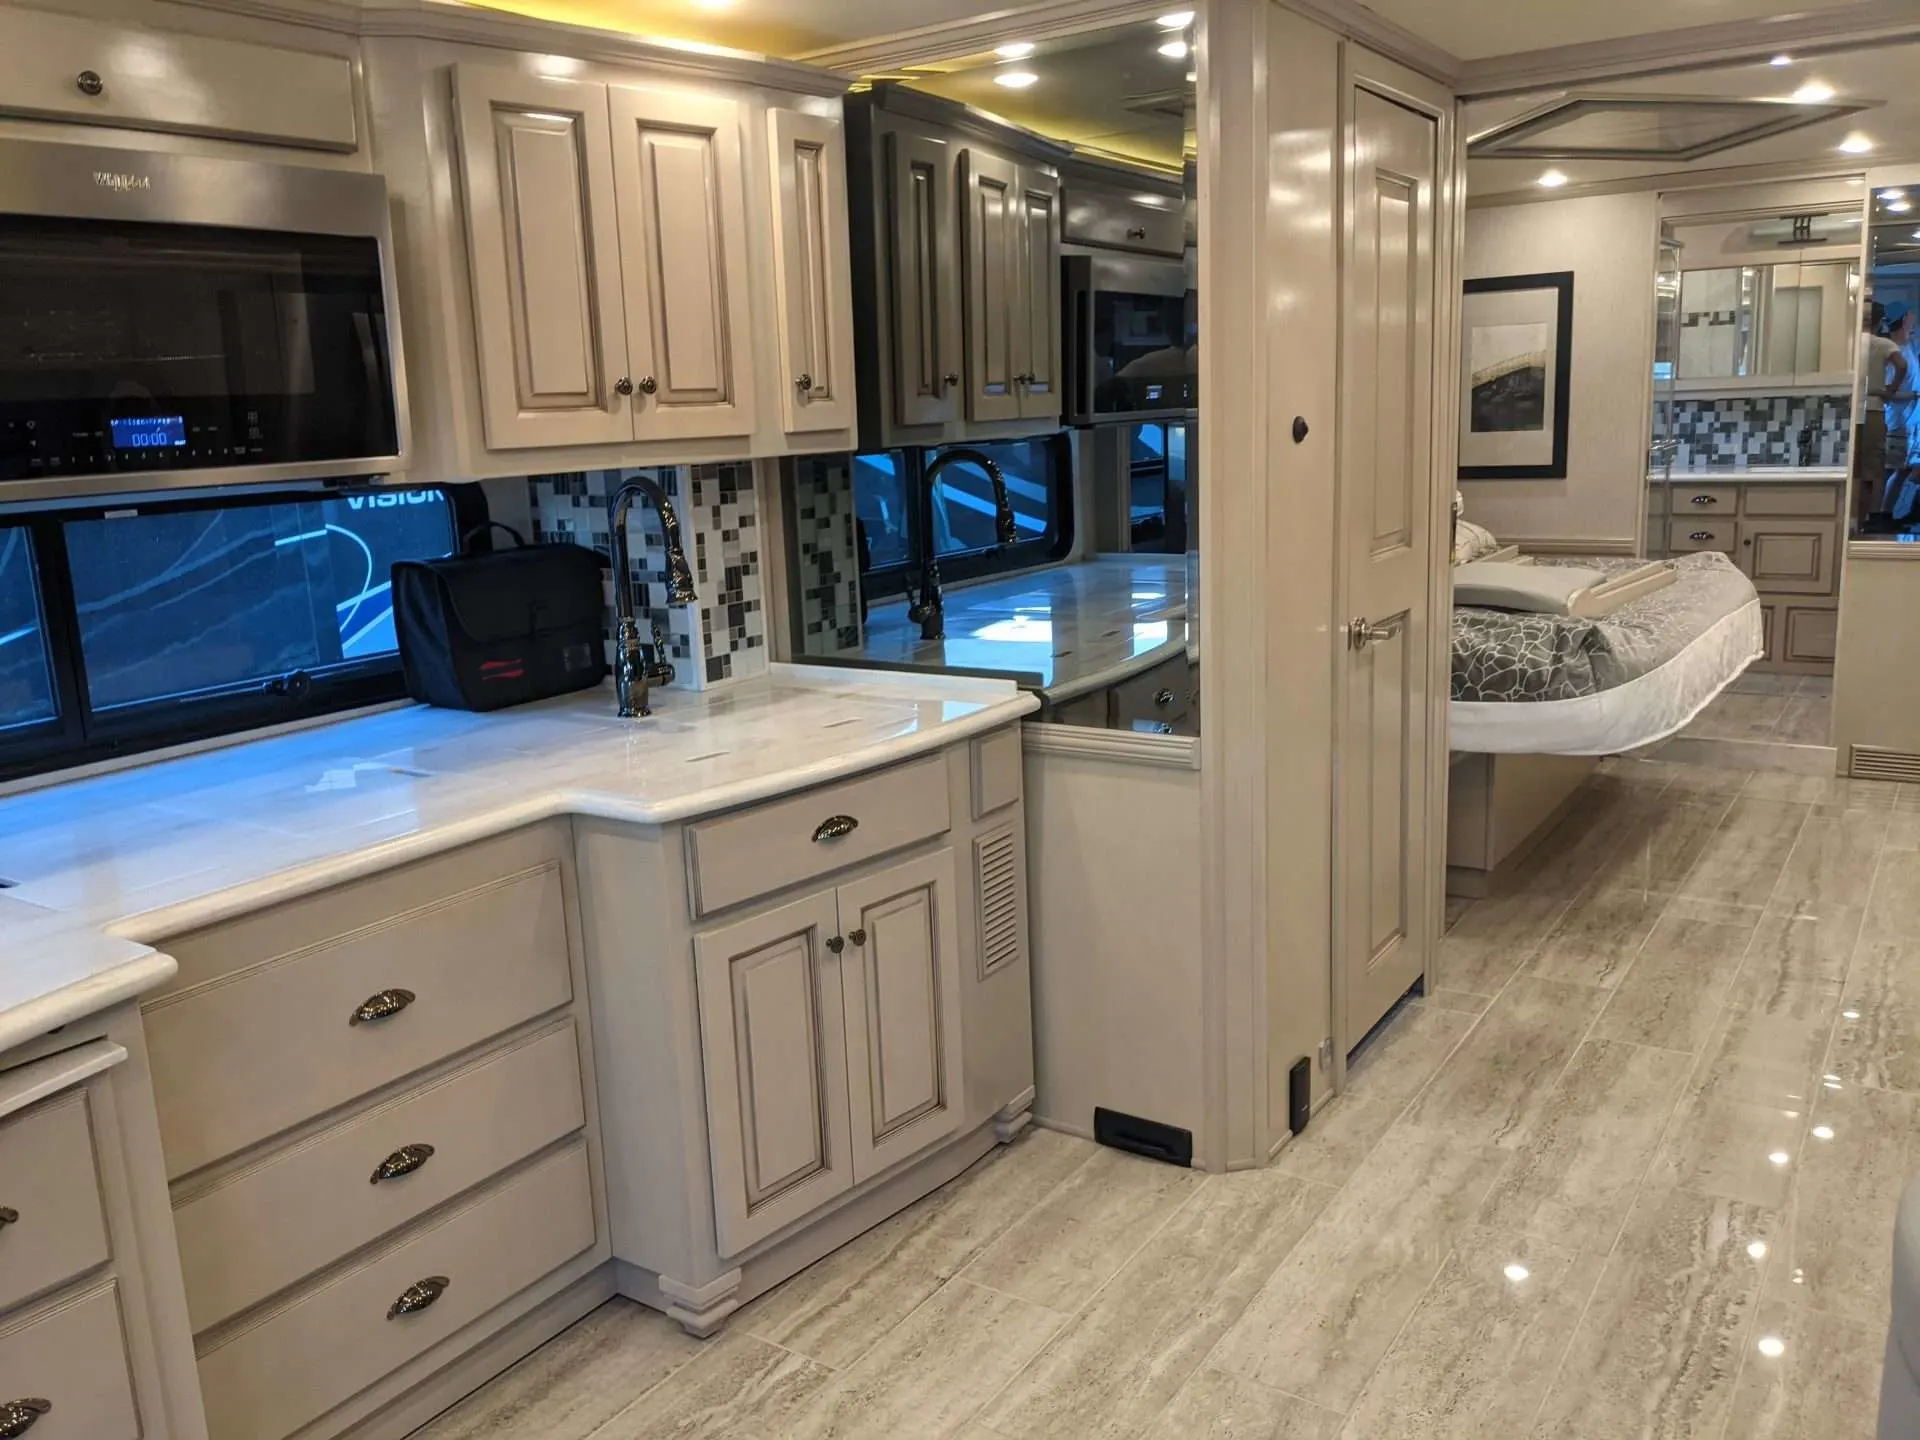 Interior of RV with heated tiled floors